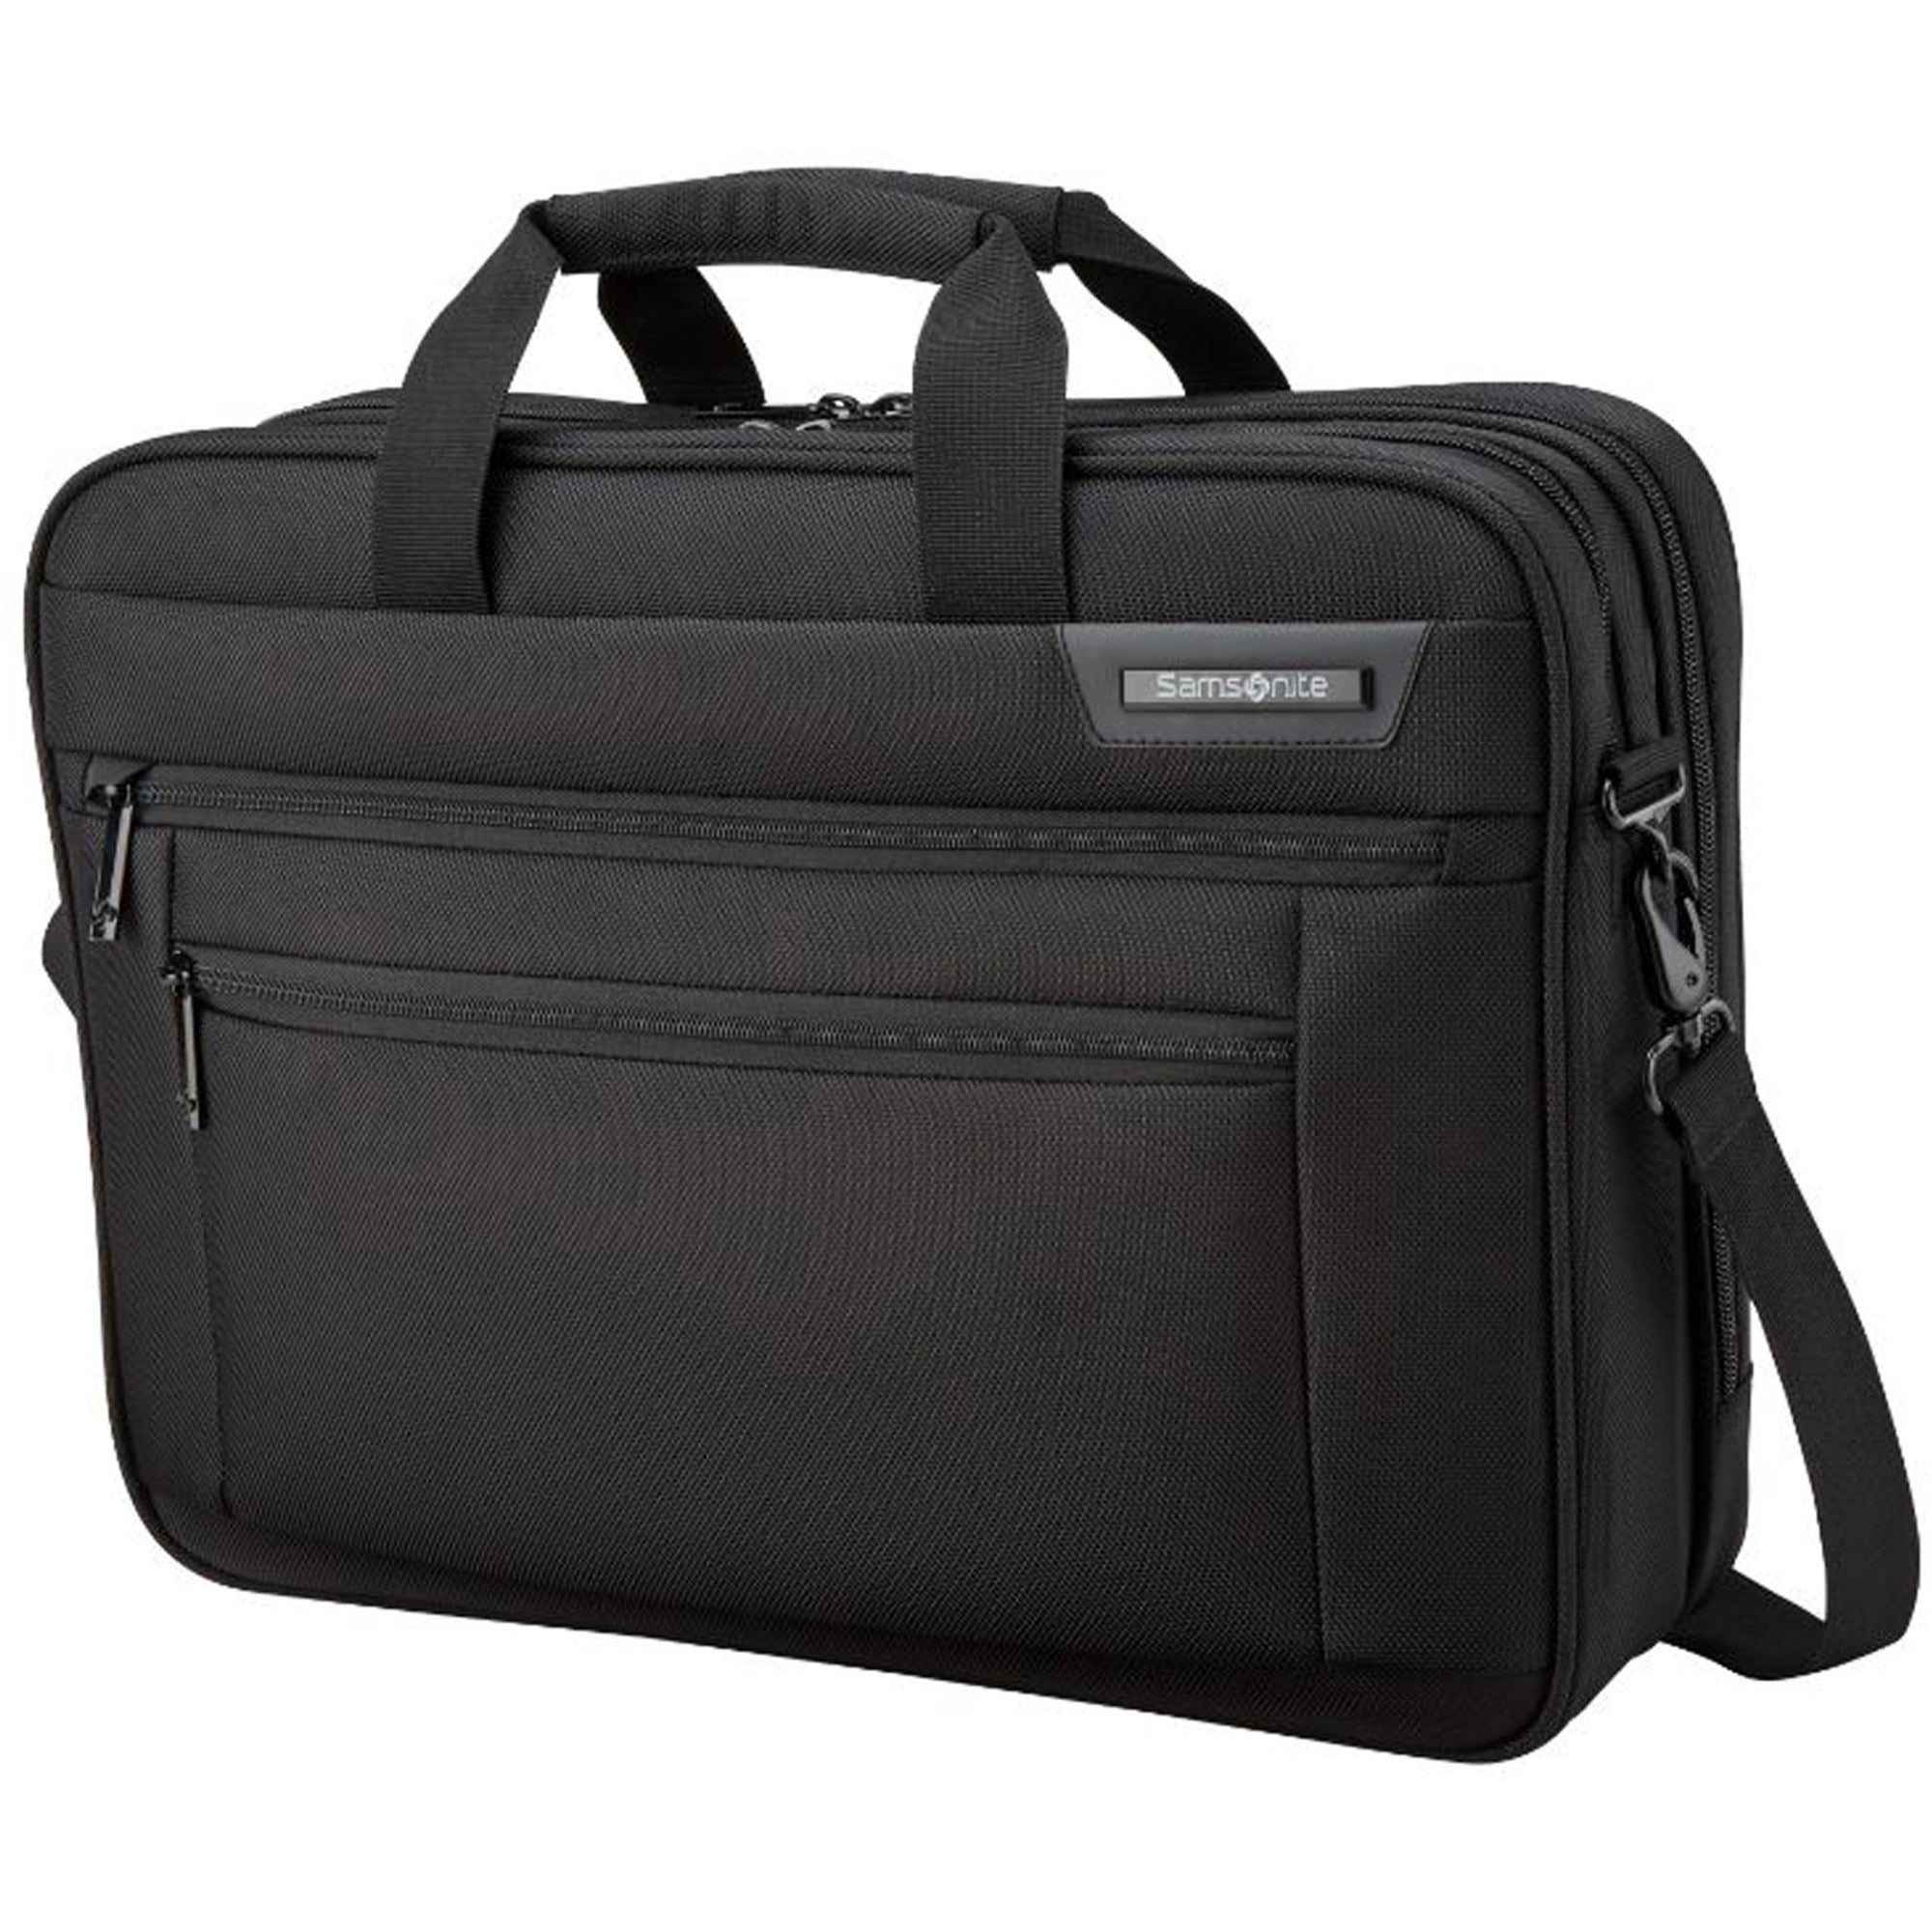 samsonite-classic-business-20-carrying-case-briefcase-for-17-notebook-black-handle-carrying-strap-shoulder-strap-125-height-x-175-width-x-45-depth-1-each_sml1412721041 - 1